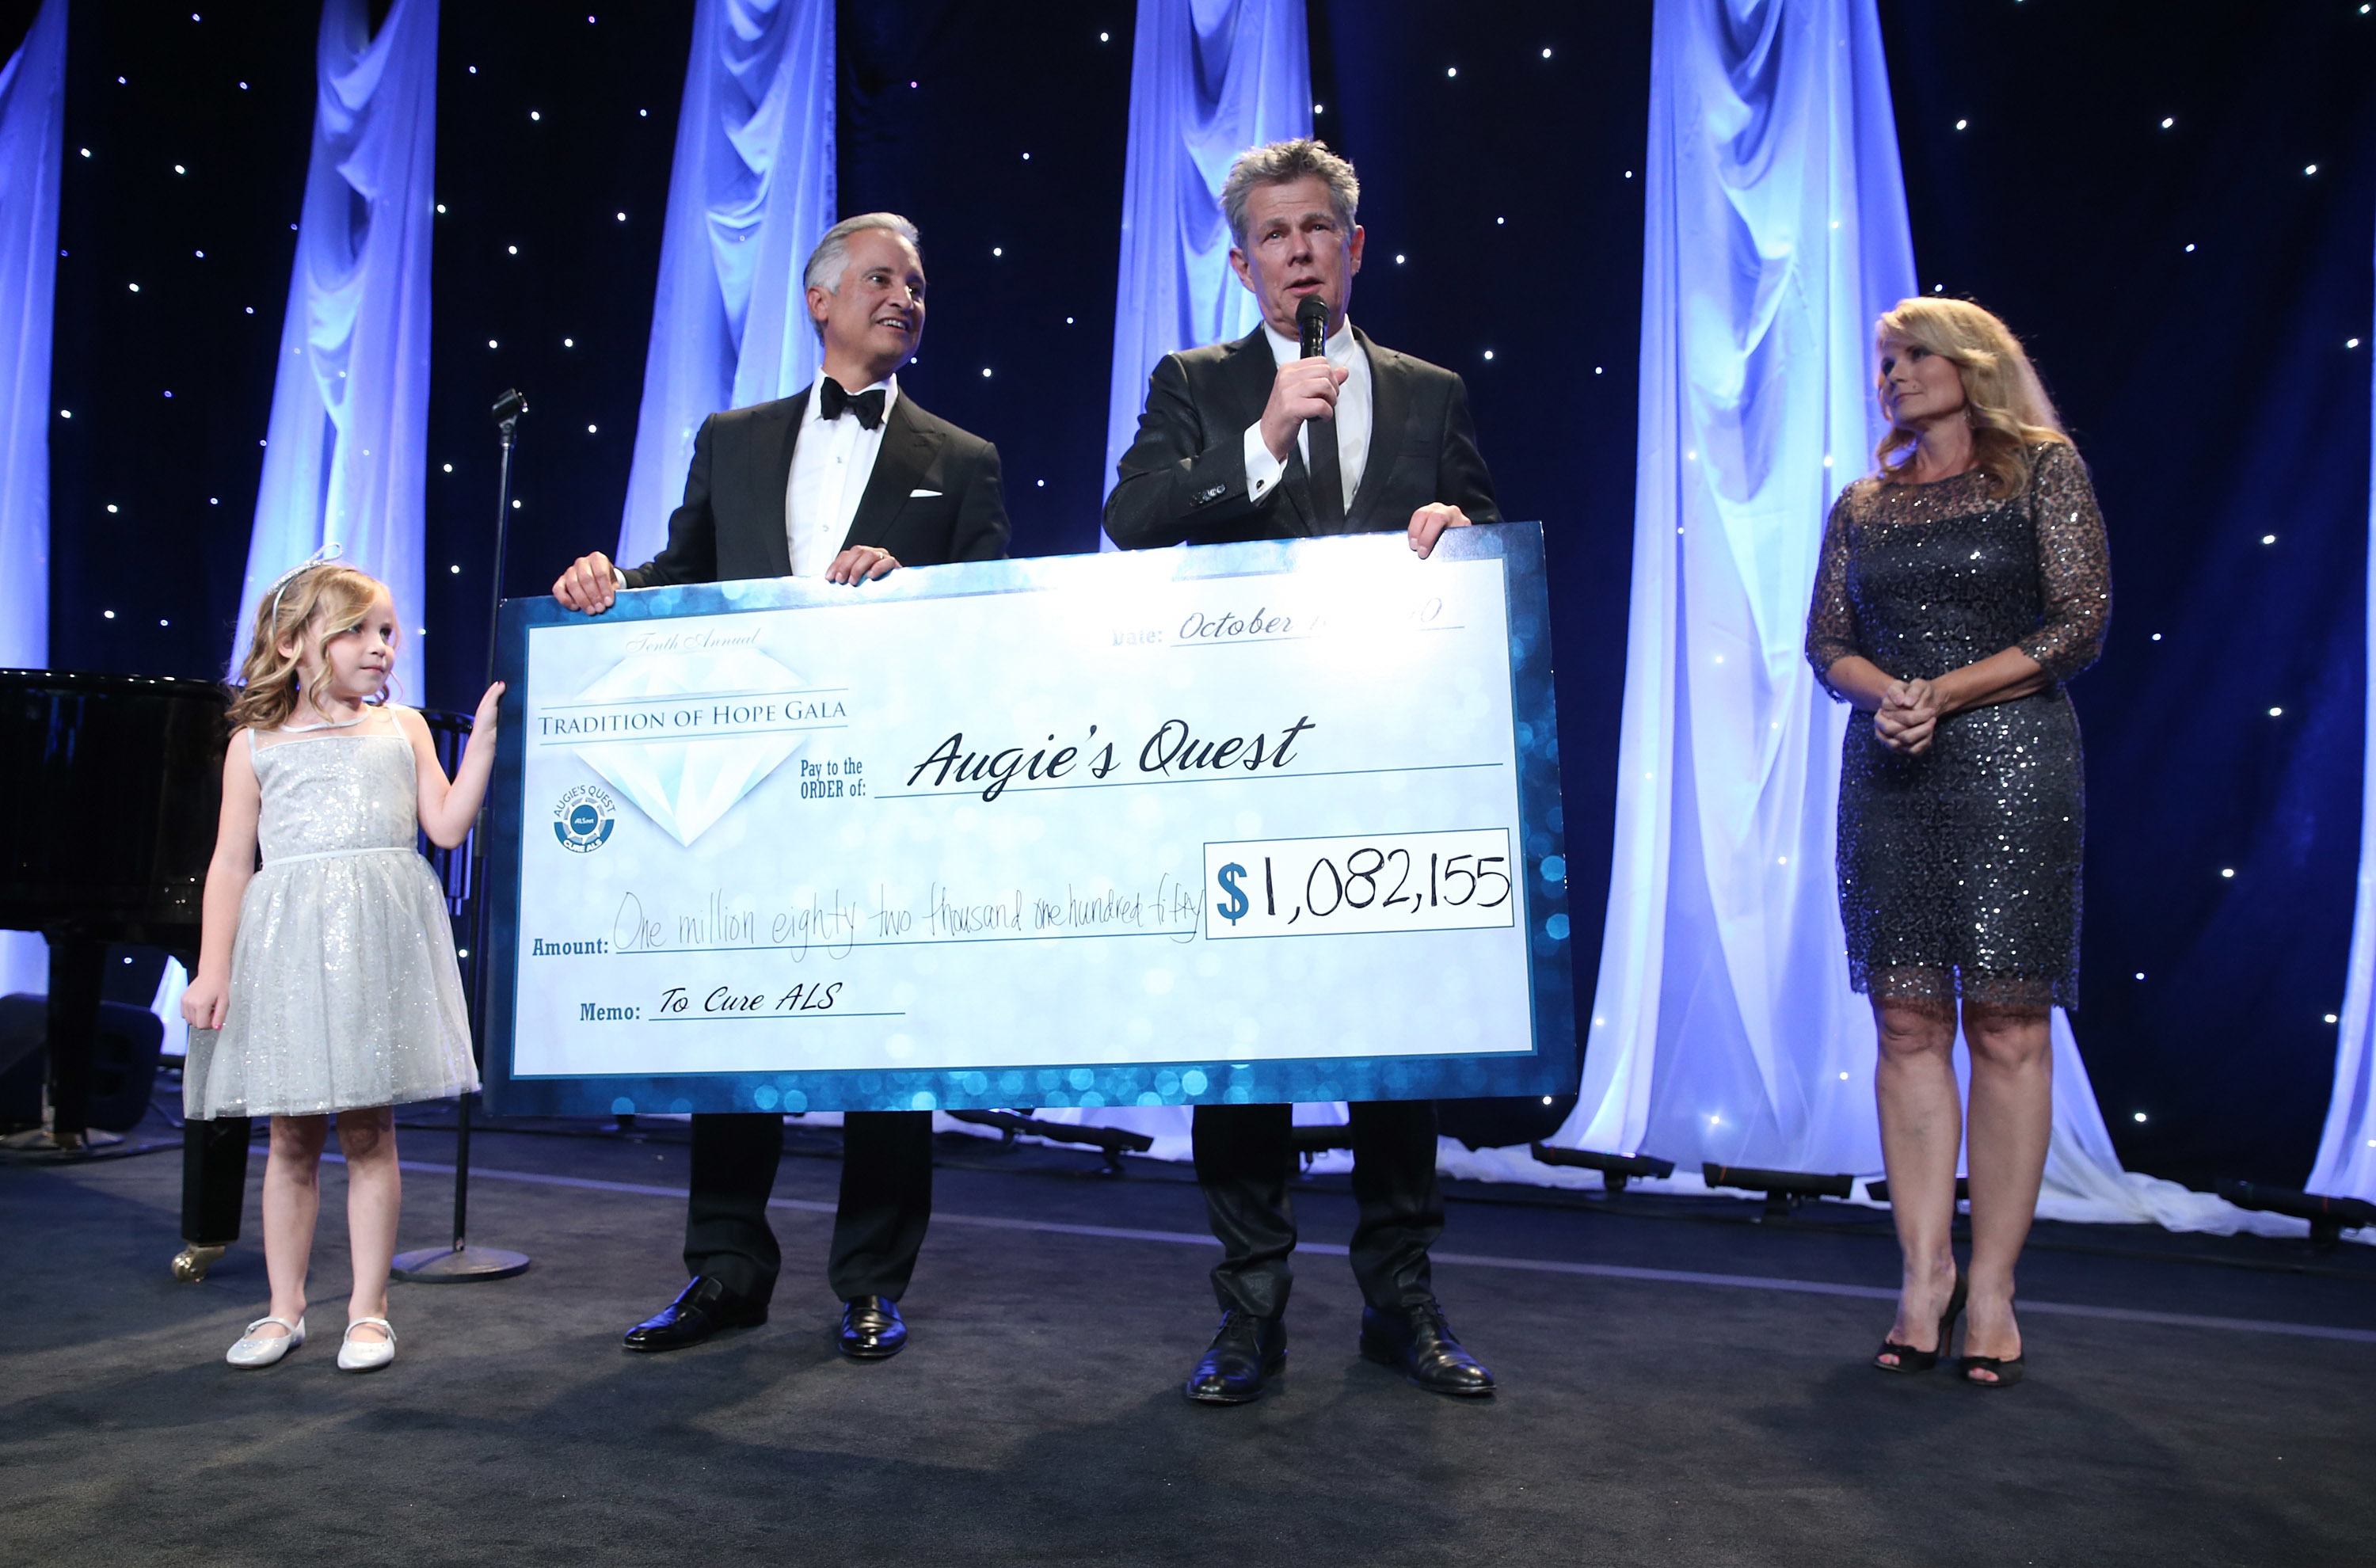 Augie’s Quest Tradition of Hope gala honoree, Bert Selva, went up on stage with David Foster and Jann Carl for the night’s check presentation. Photo credit Steve Cohn.